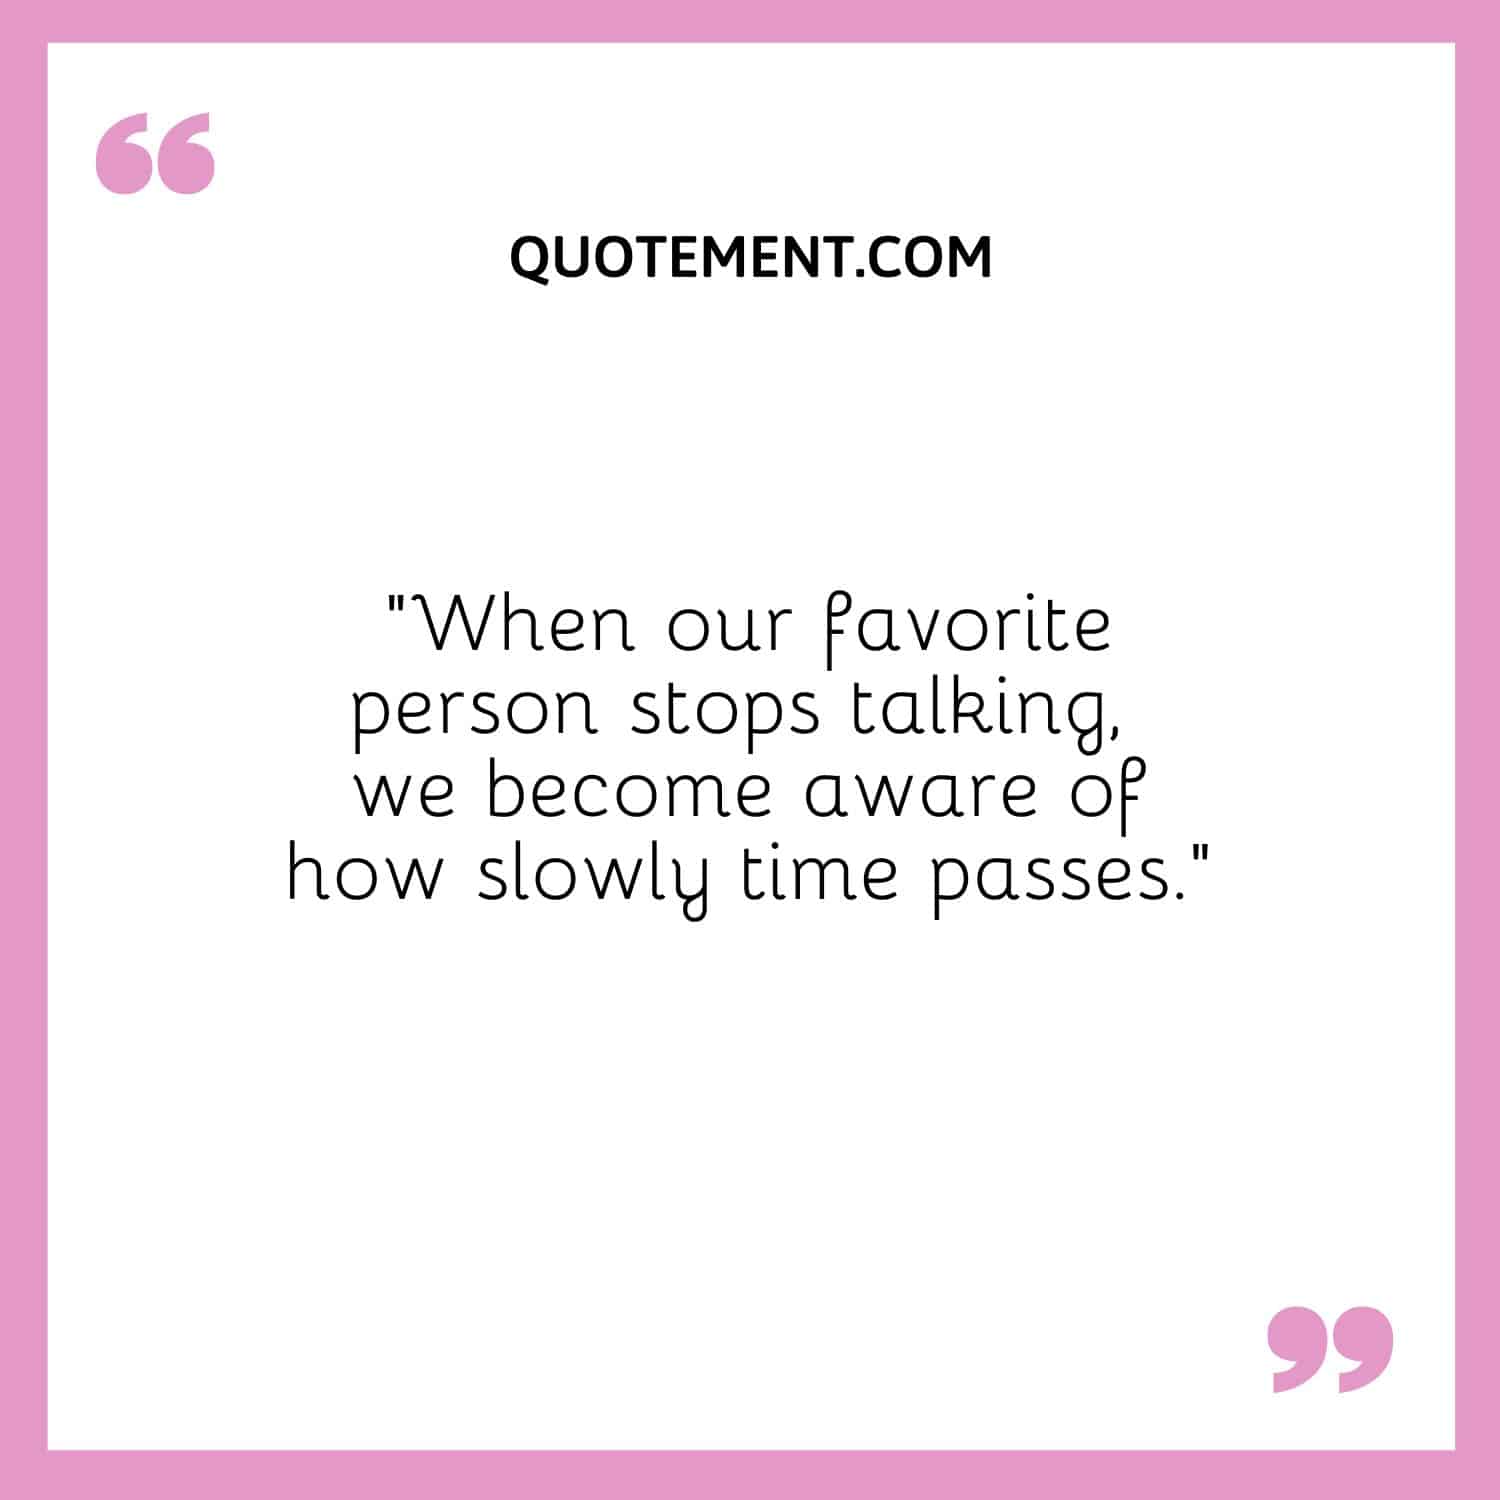 When our favorite person stops talking, we become aware of how slowly time passes